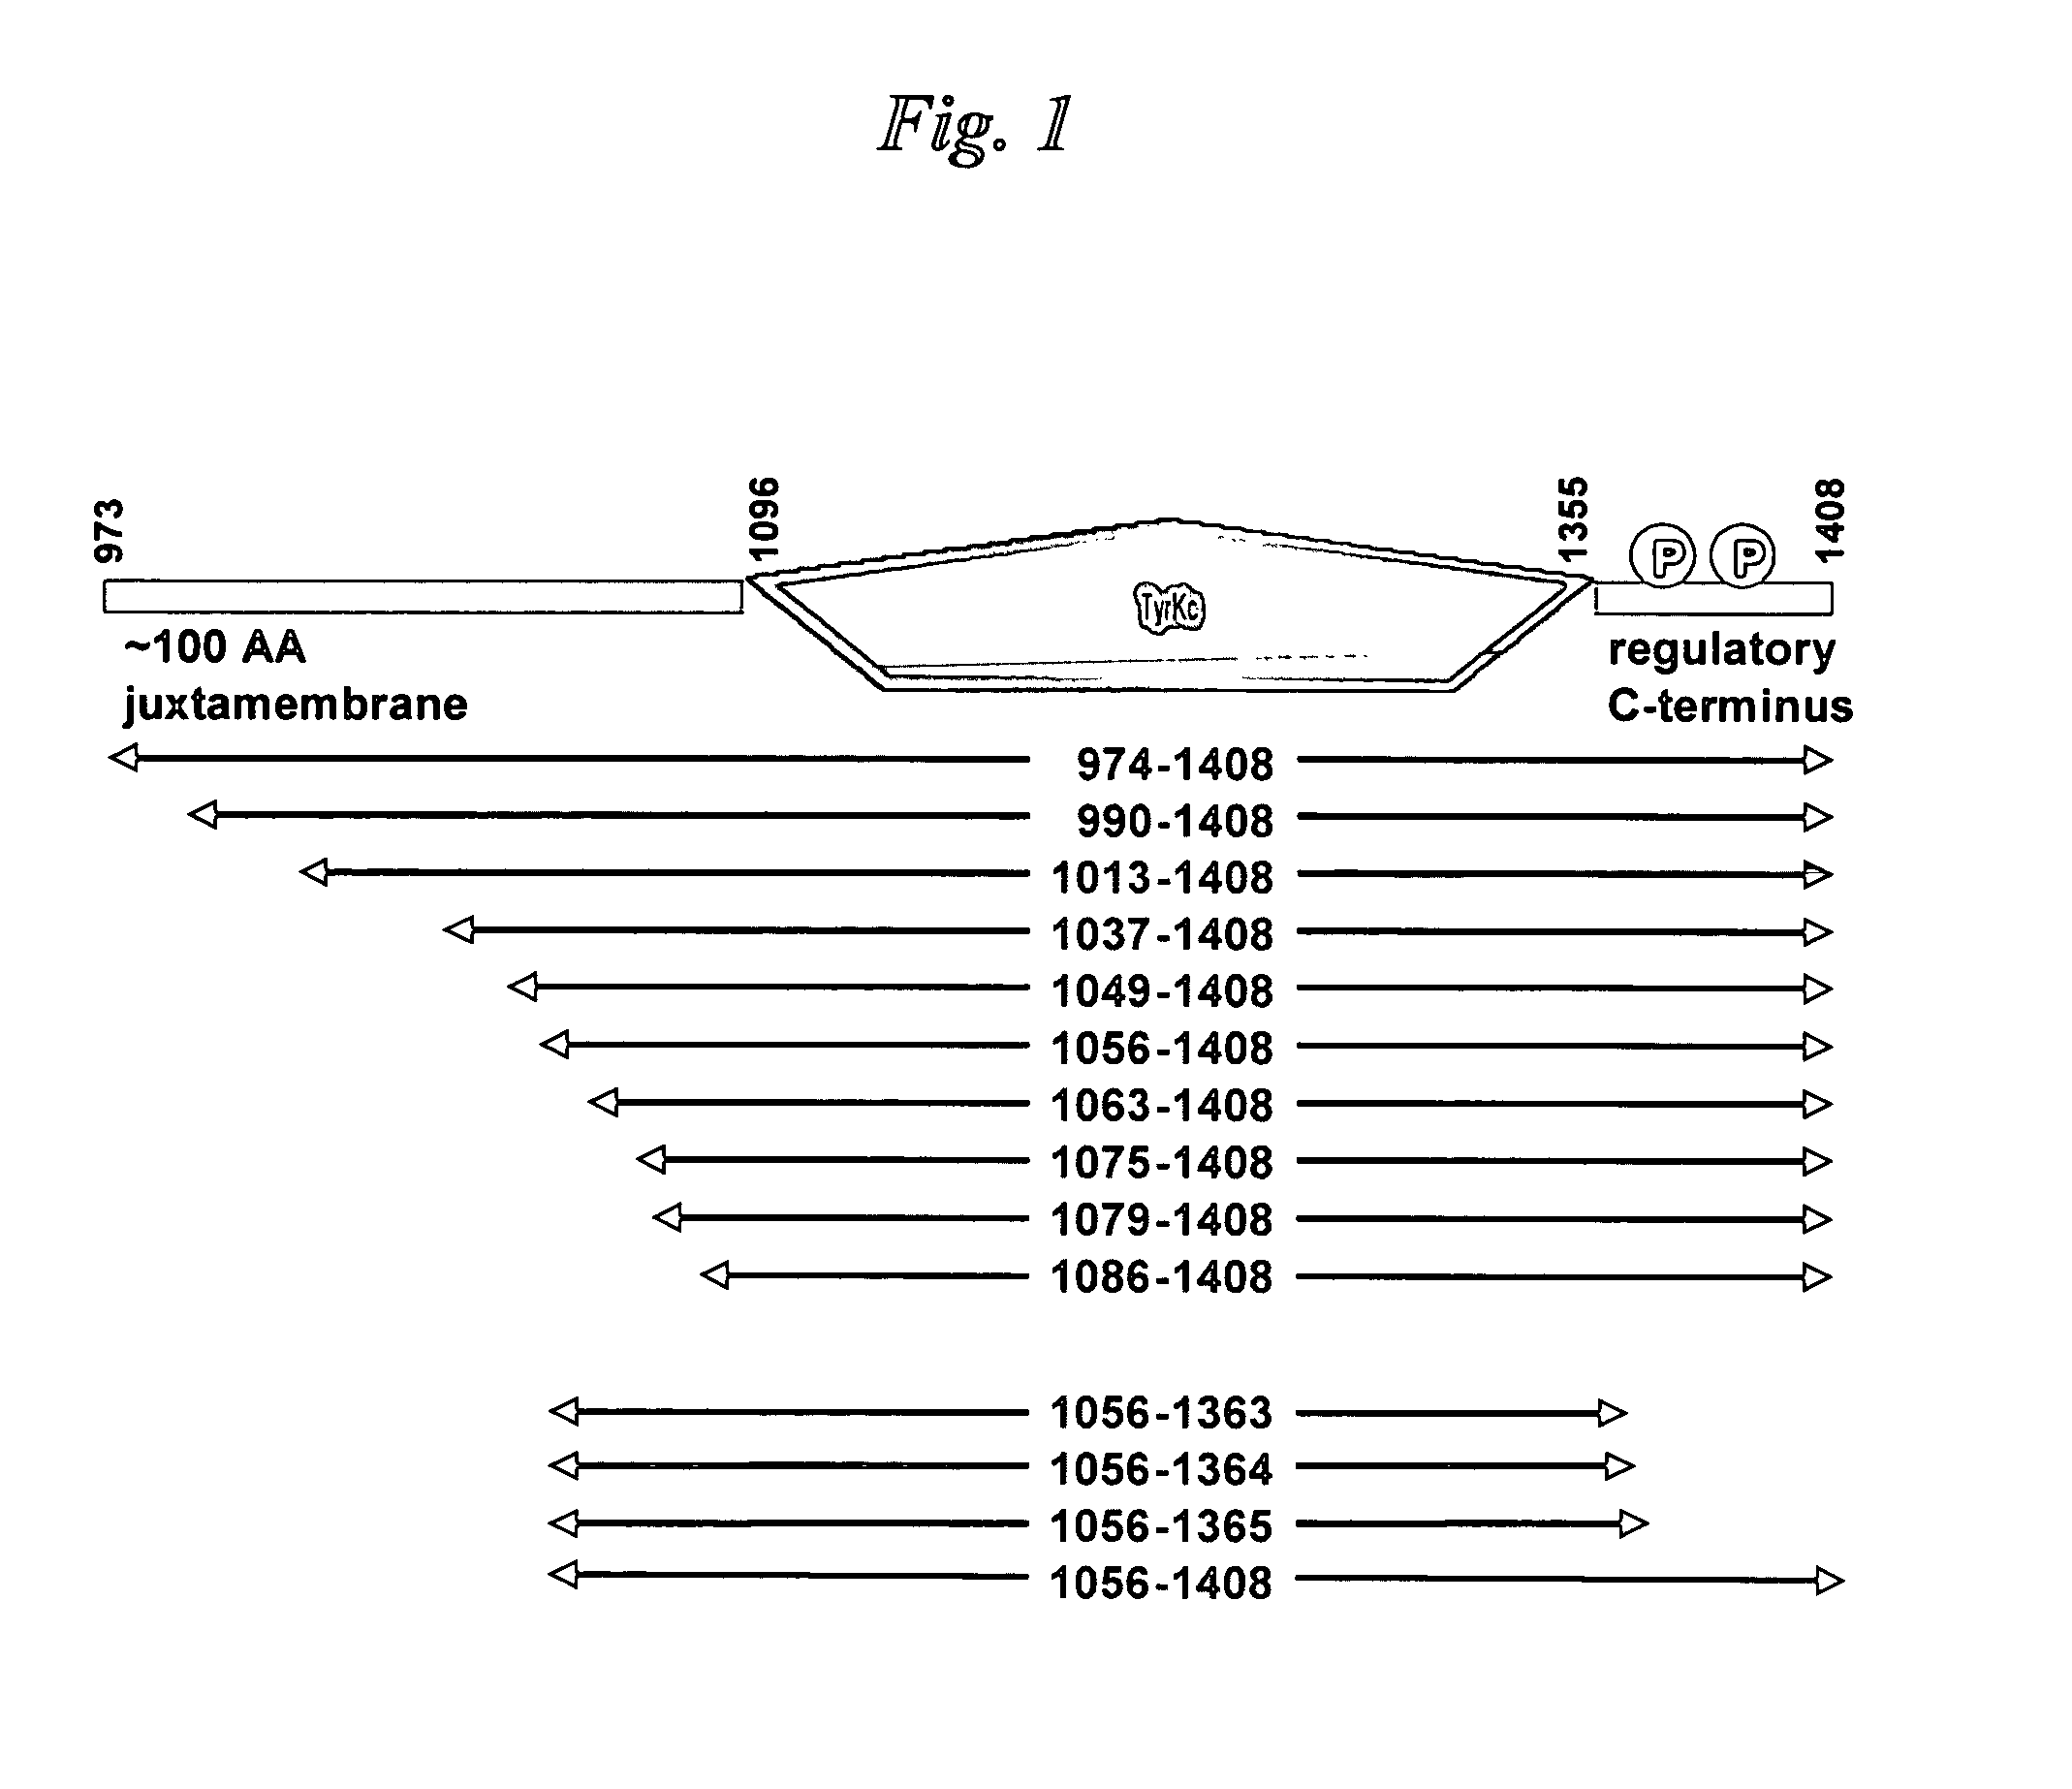 Nucleic acids encoding kinase and phosphatase enzymes, expression vectors and cells containing same